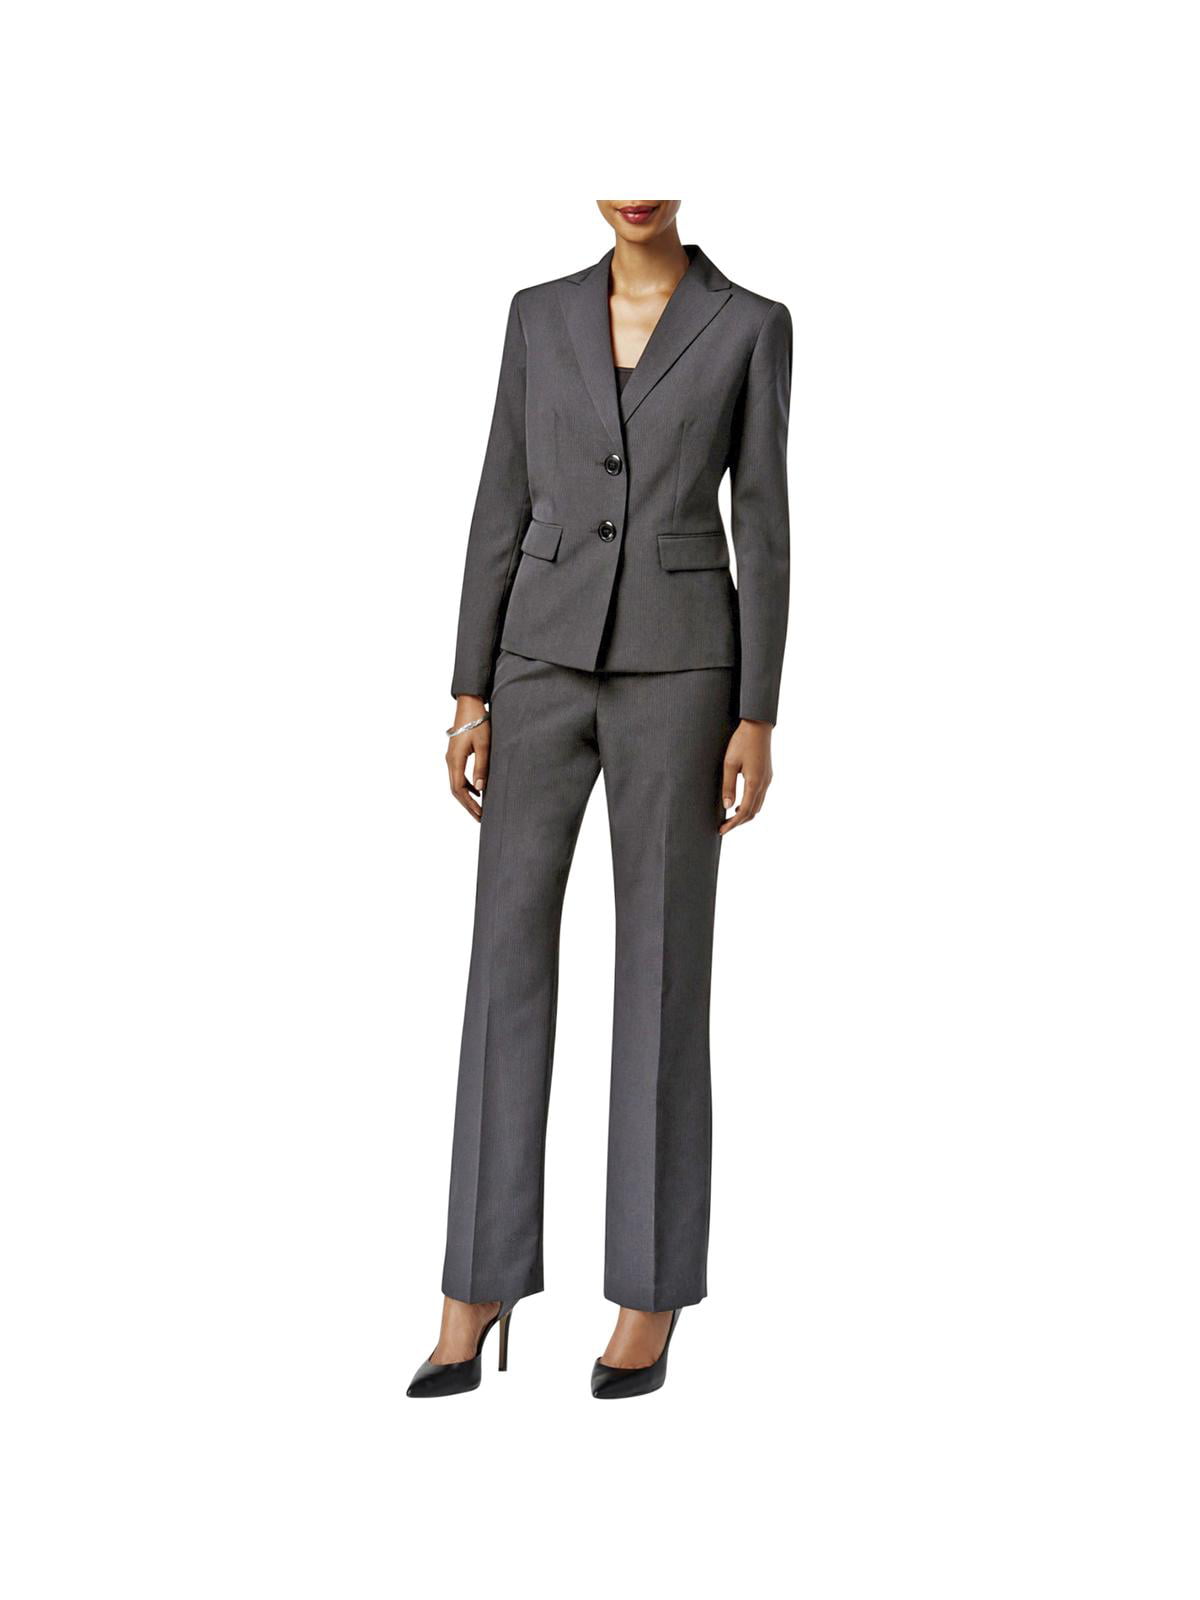 Buy > formal pant suit for women > in stock